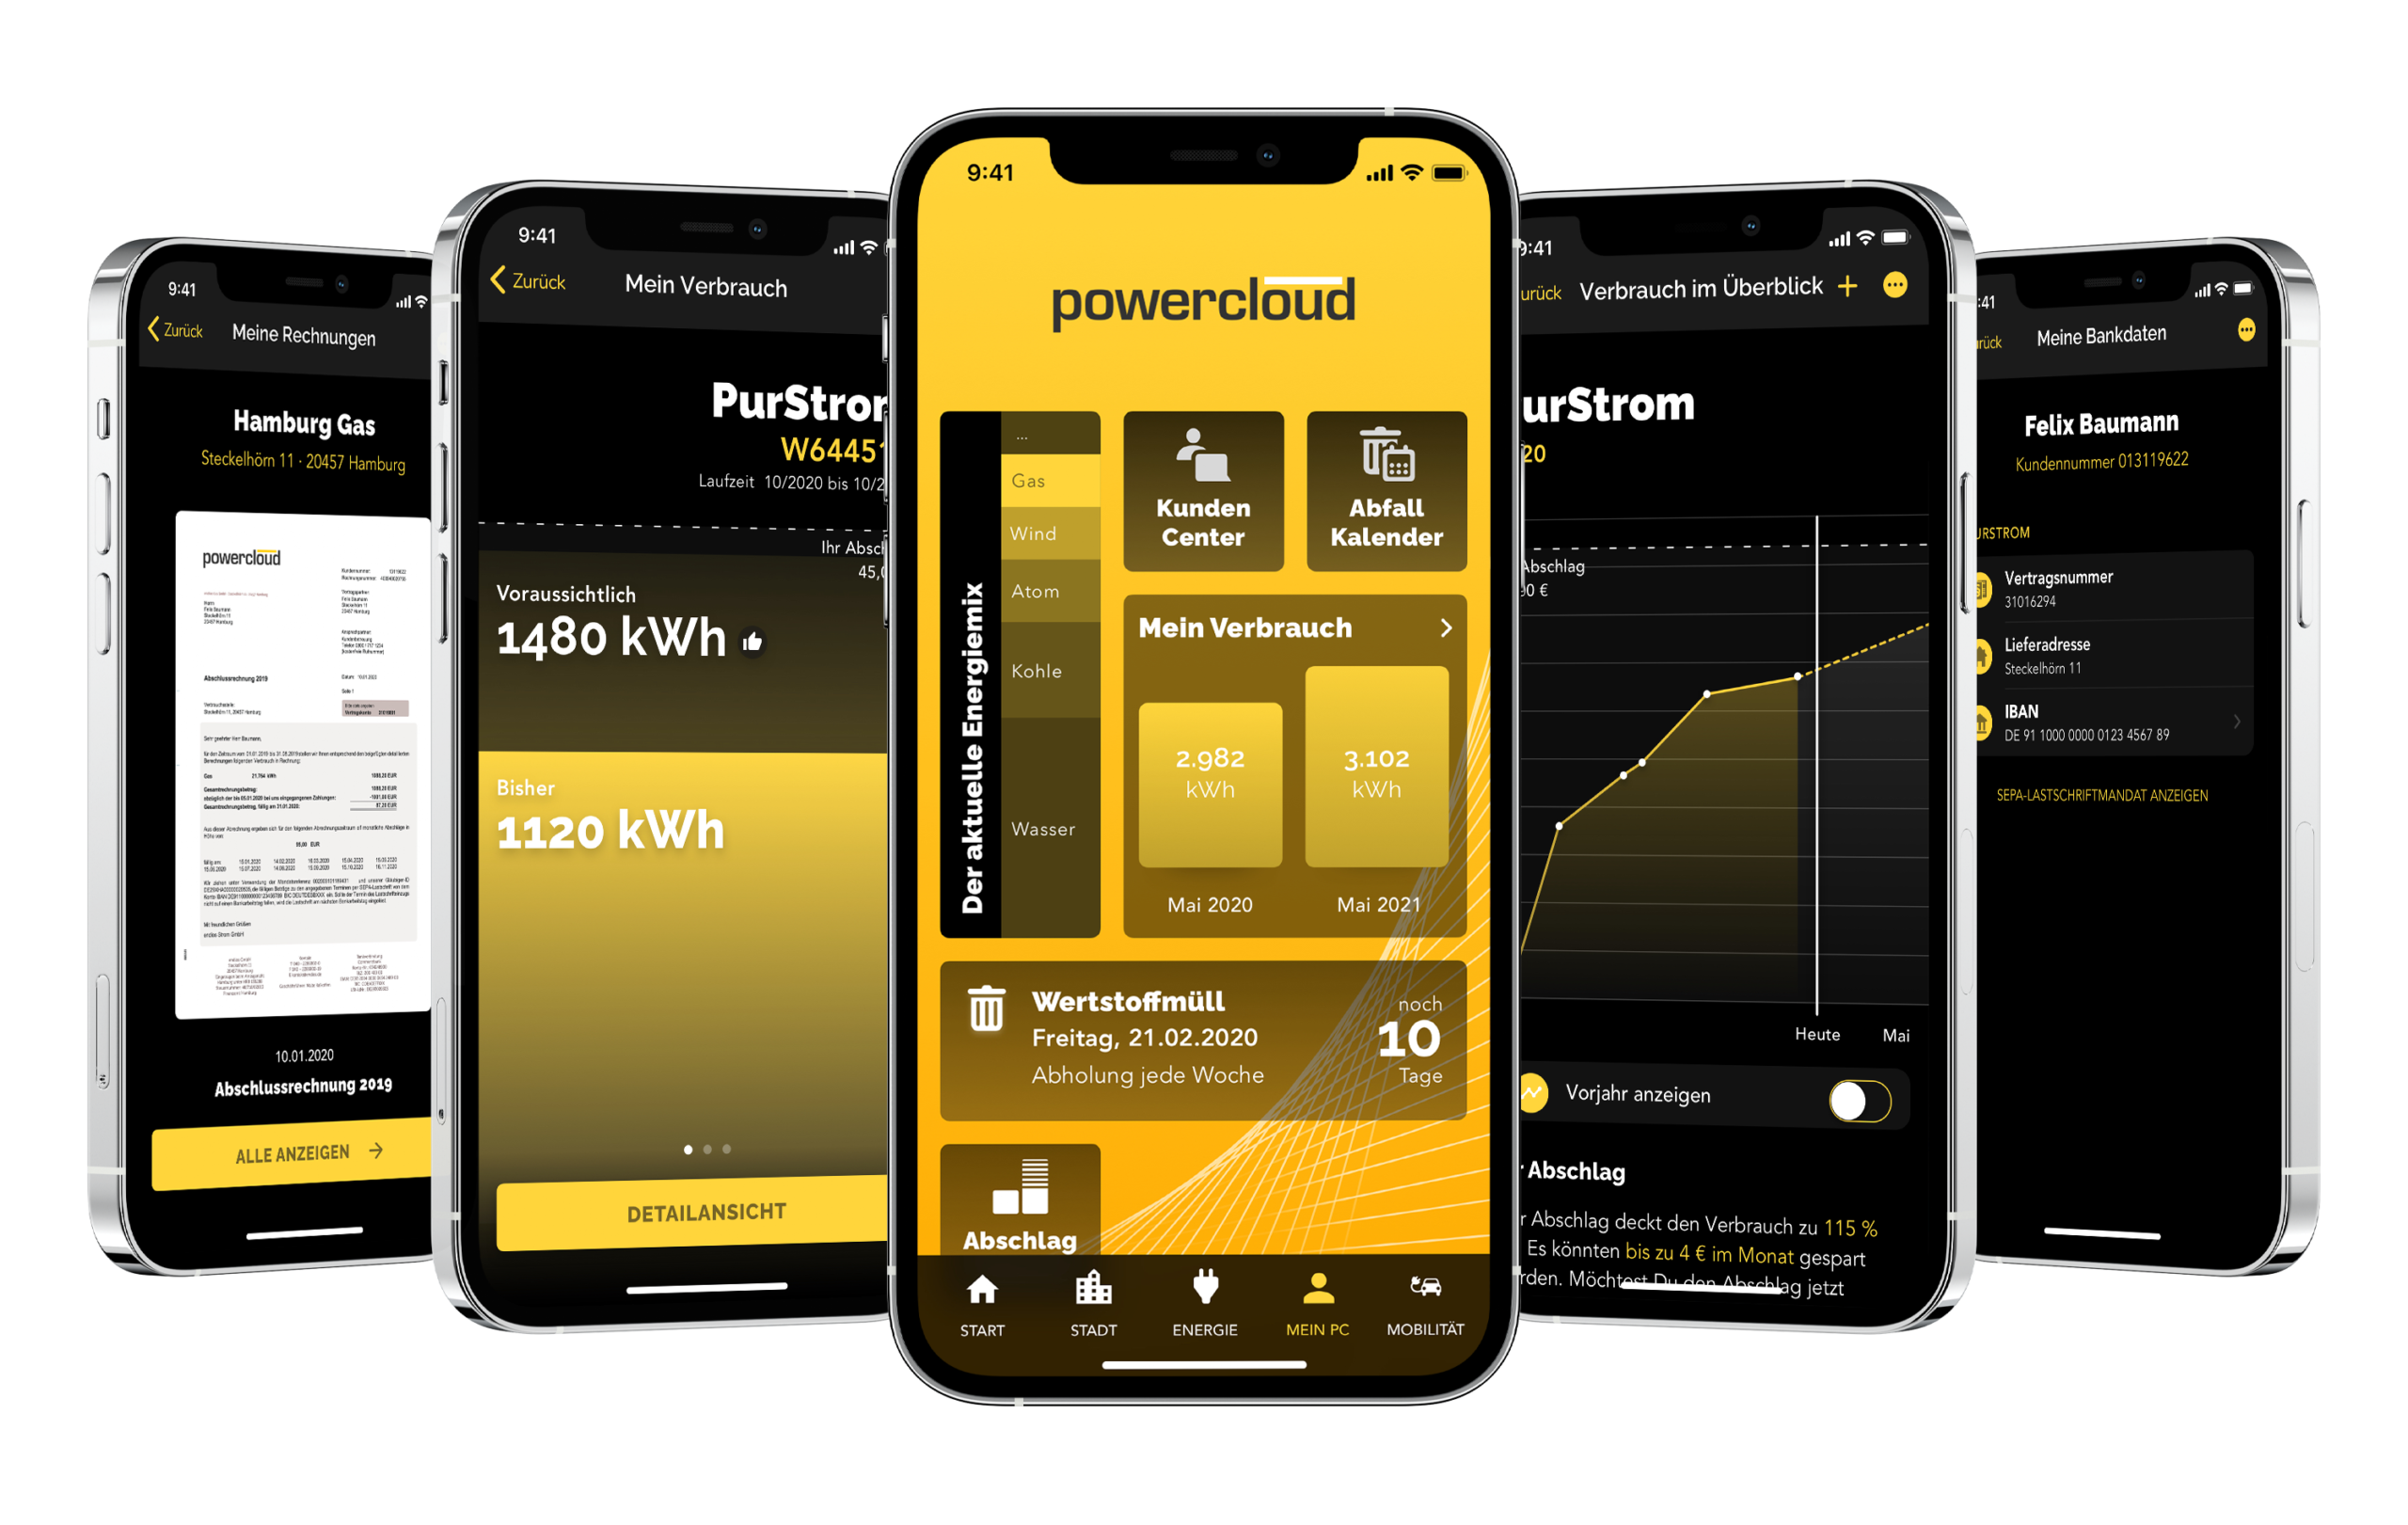 endios and powercloud: Radically reduce the utility’s digital service costs by using a mobile app